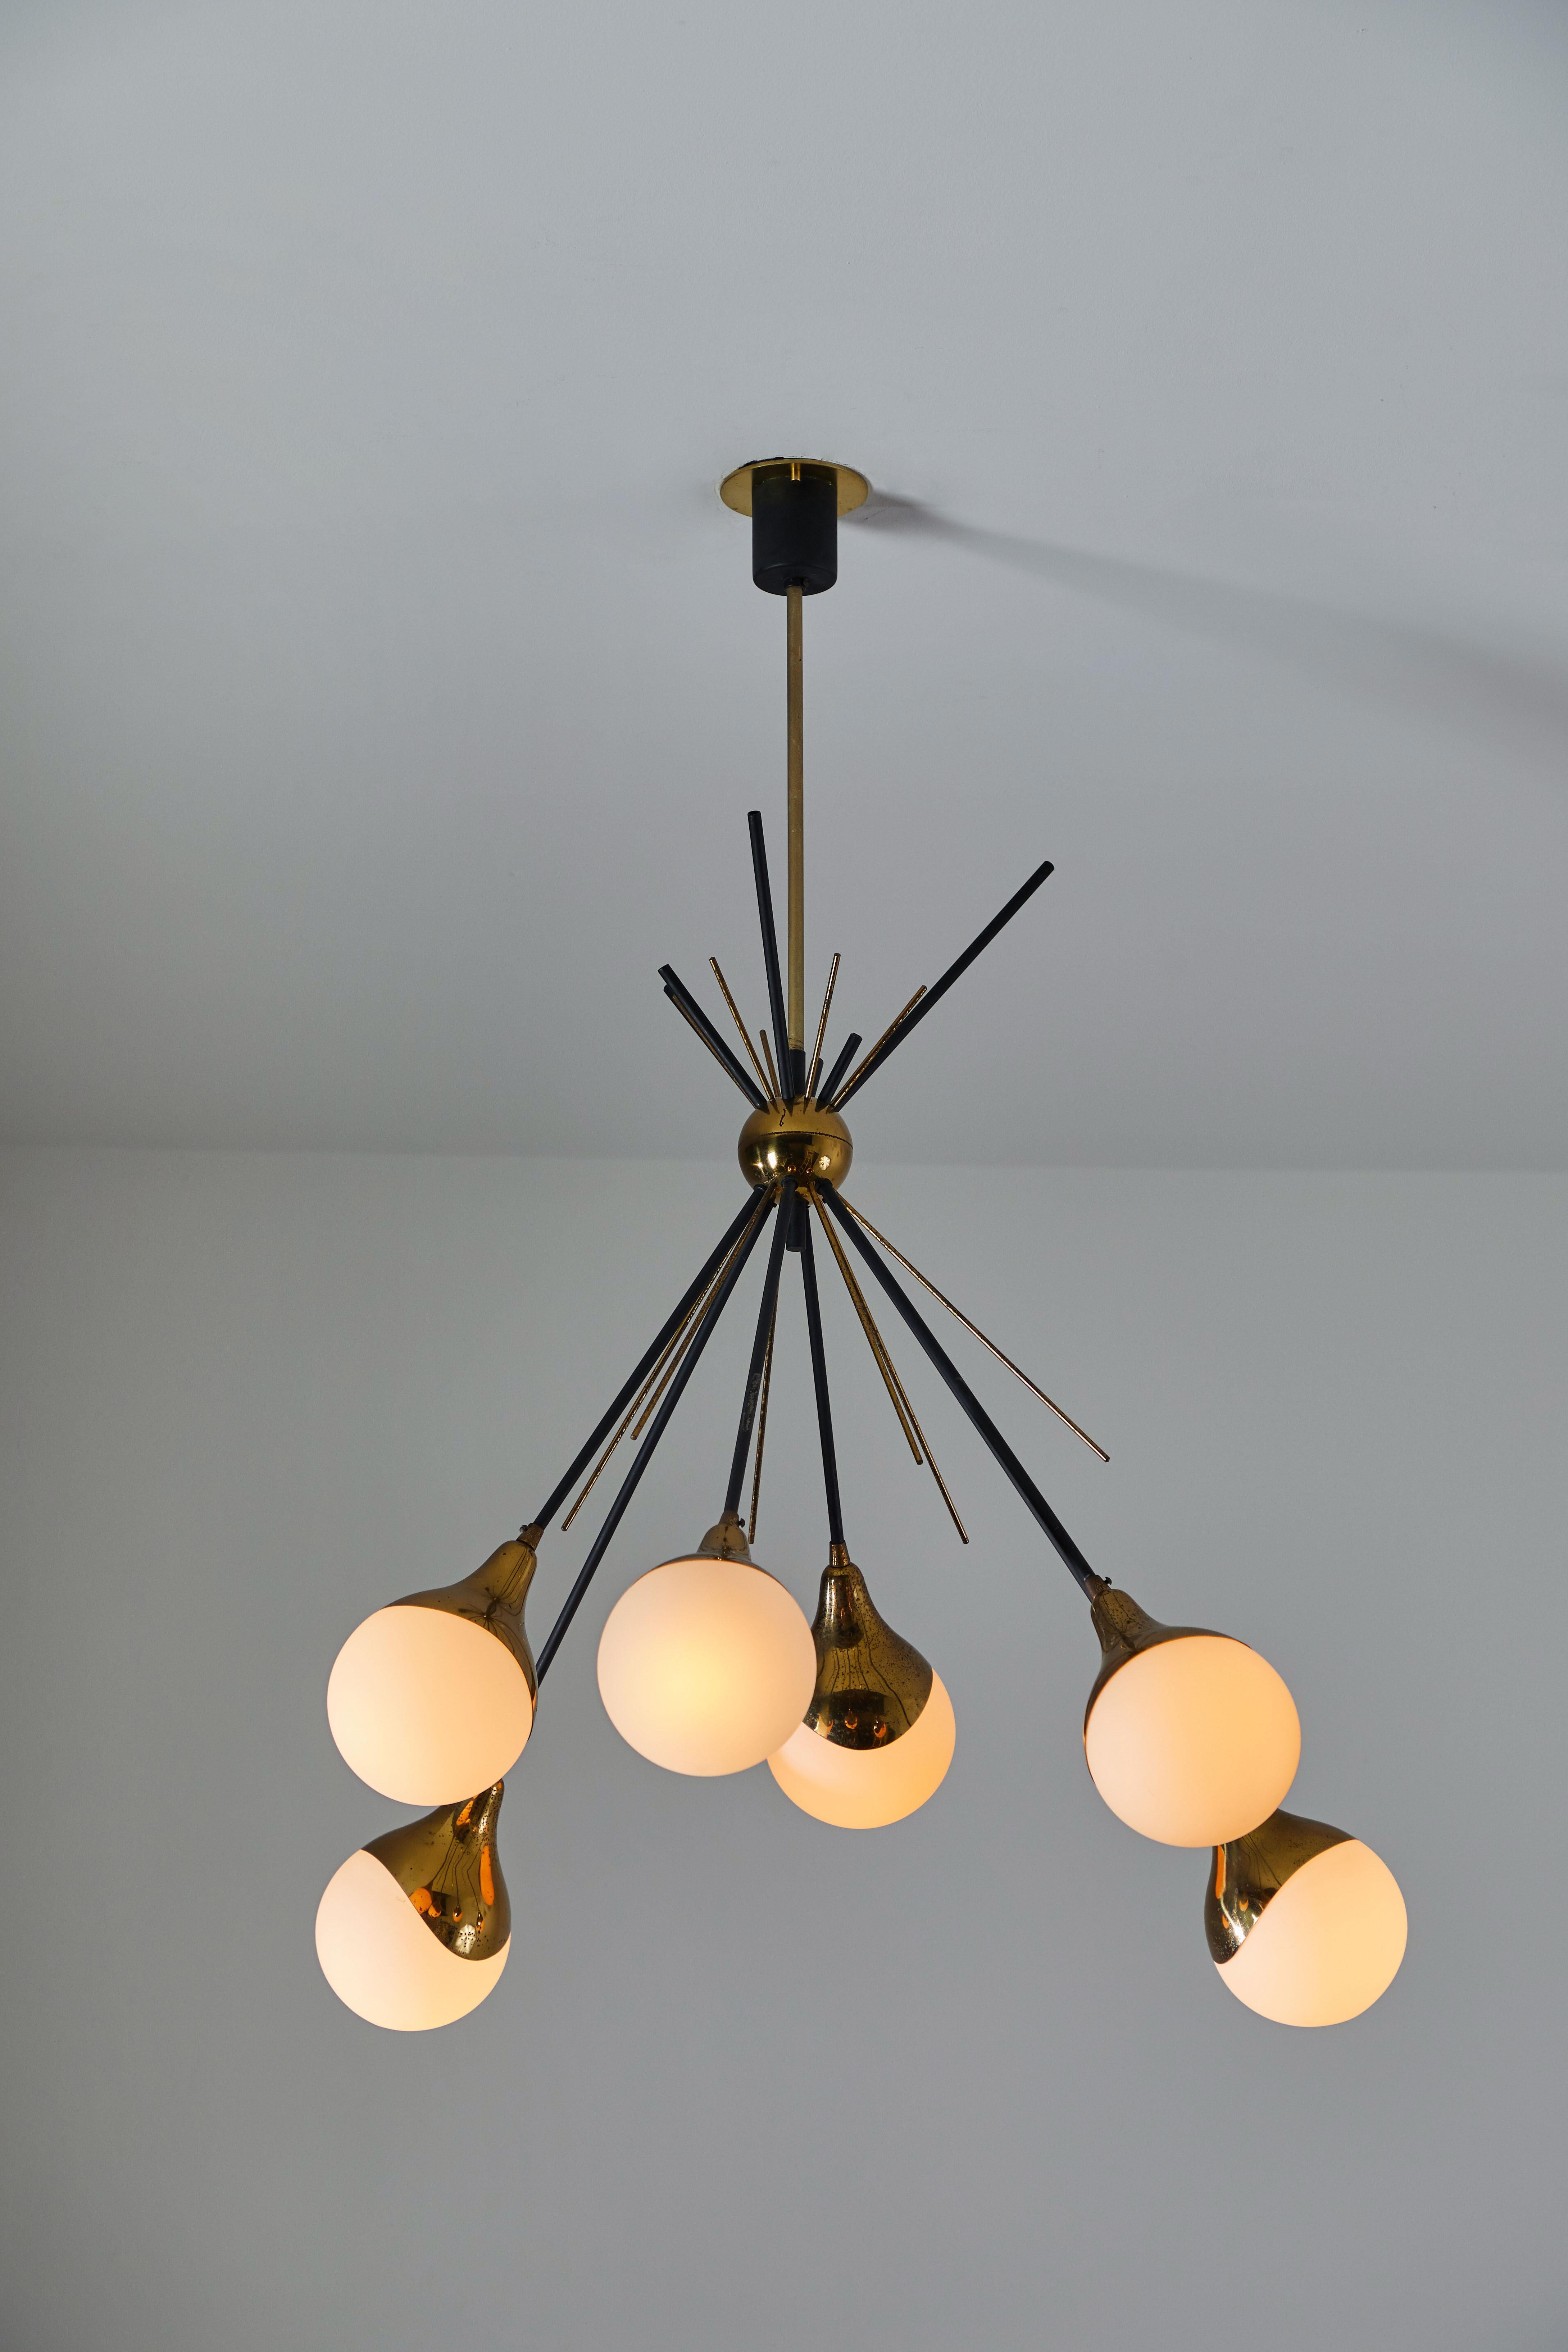 Six Globe chandelier by Stilnovo. Manufactured in Italy, circa 1950s. Brass, brushed satin glass diffusers, enameled metal. Custom brass ceiling plate. Original canopy. Rewired for US junction boxes. Takes six E14 25w maximum bulbs.